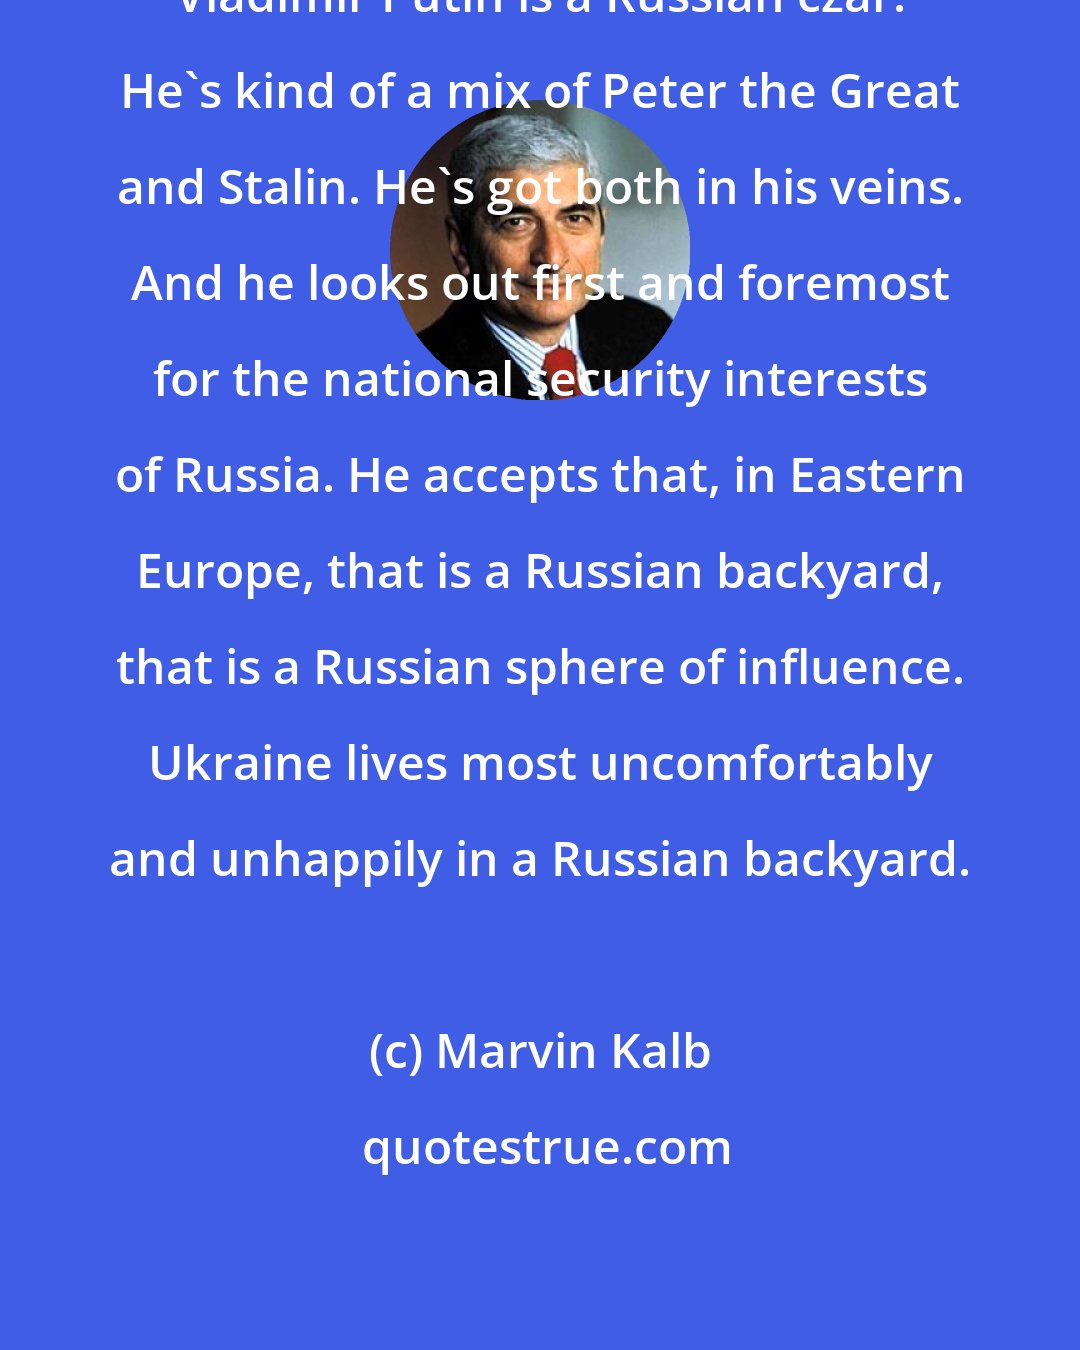 Marvin Kalb: Vladimir Putin is a Russian czar. He's kind of a mix of Peter the Great and Stalin. He's got both in his veins. And he looks out first and foremost for the national security interests of Russia. He accepts that, in Eastern Europe, that is a Russian backyard, that is a Russian sphere of influence. Ukraine lives most uncomfortably and unhappily in a Russian backyard.